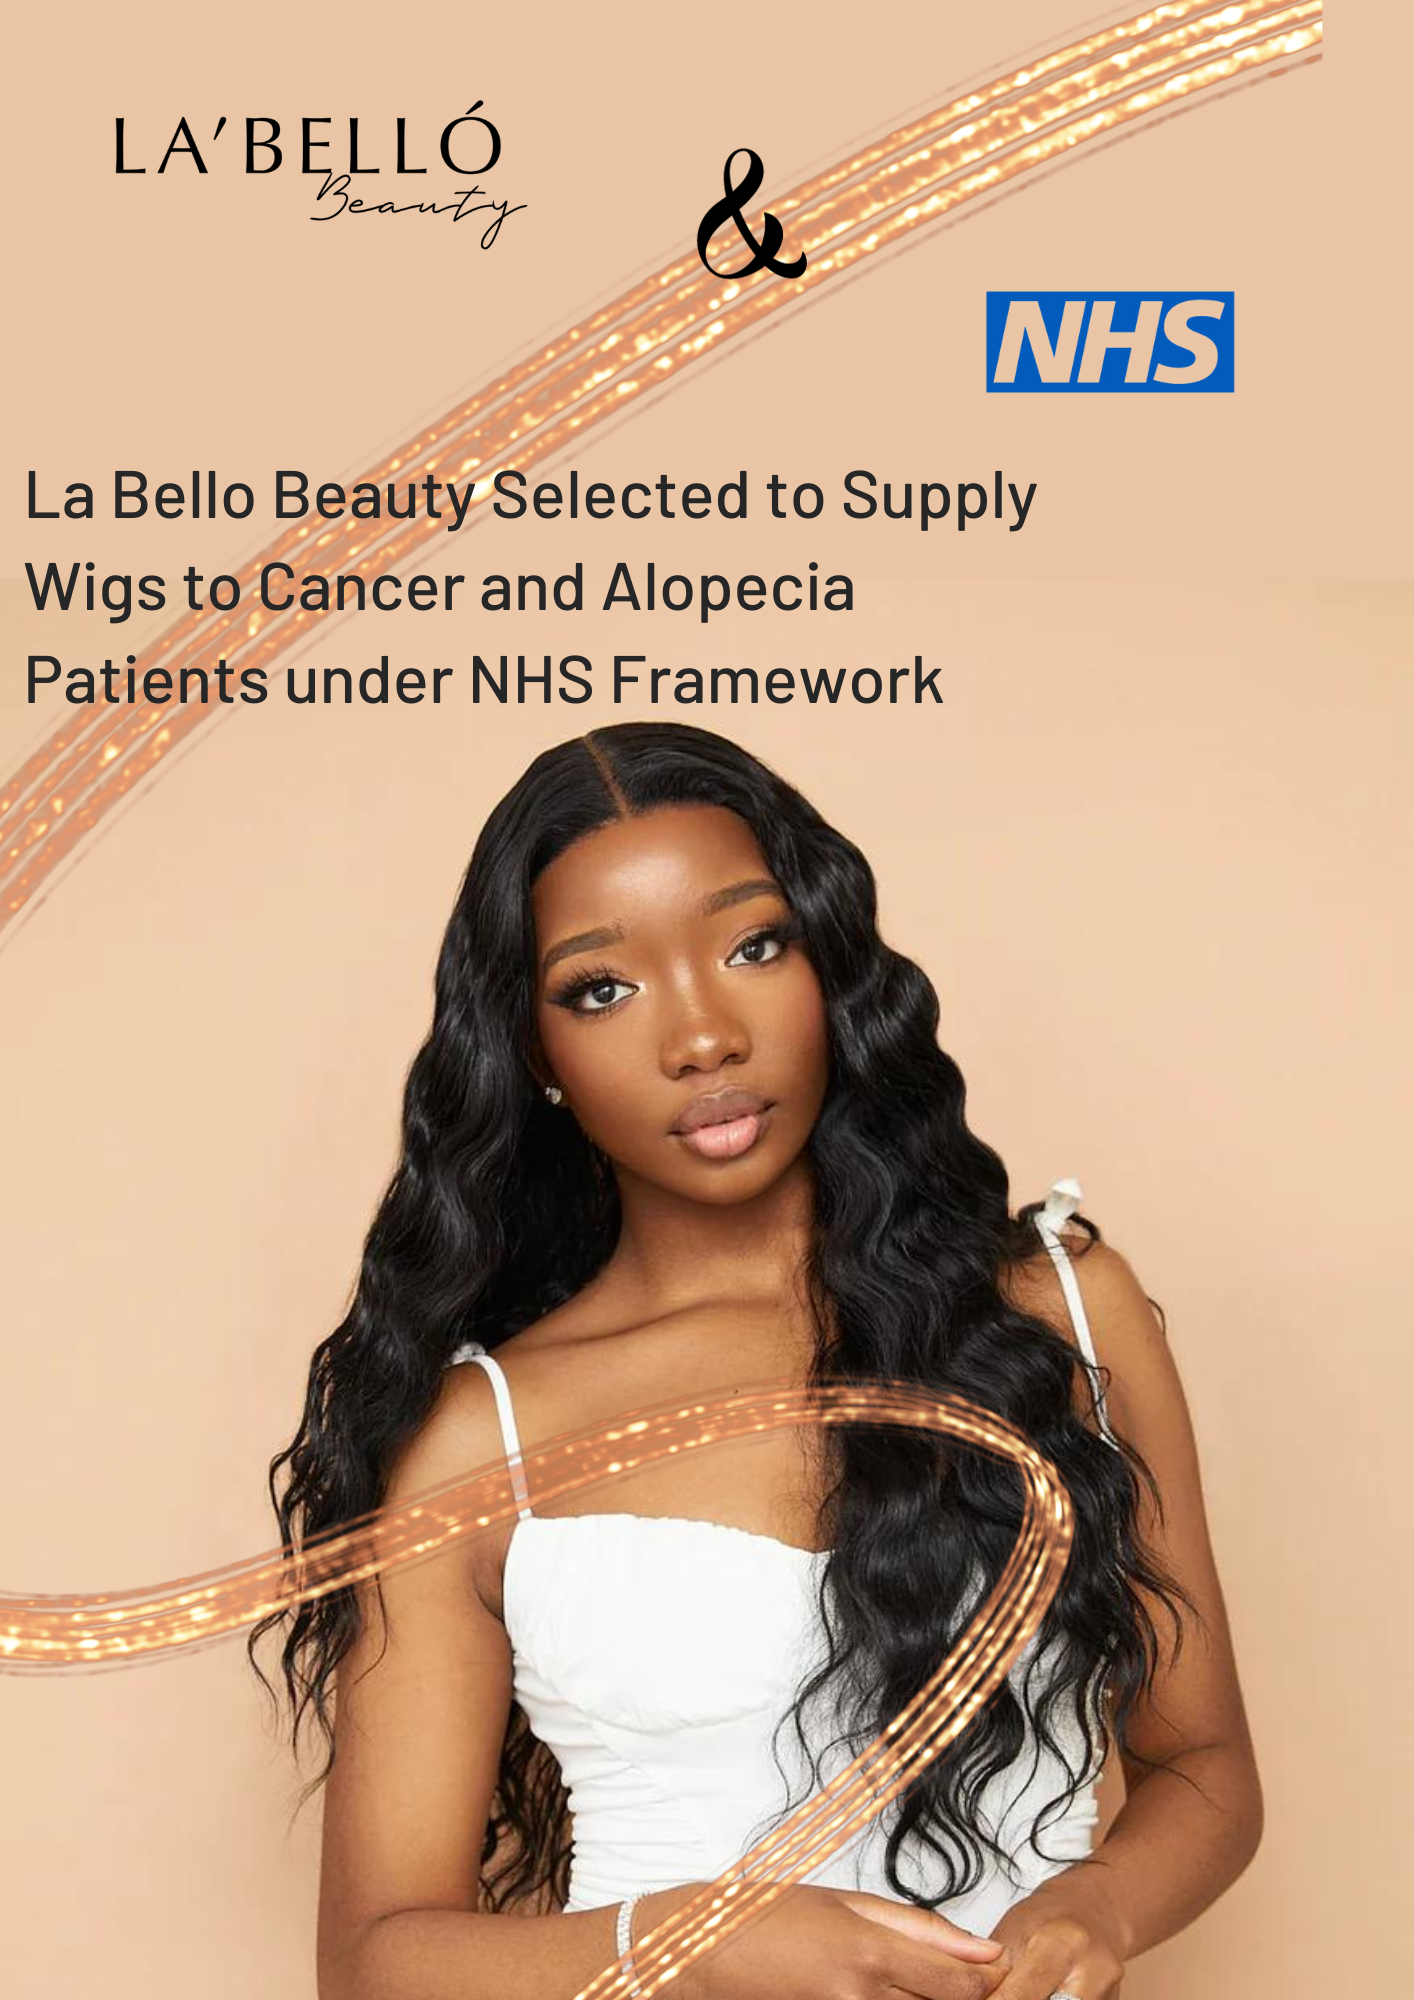 La Bello Beauty Selected to Supply Wigs to Cancer and Alopecia Patients under NHS Framework